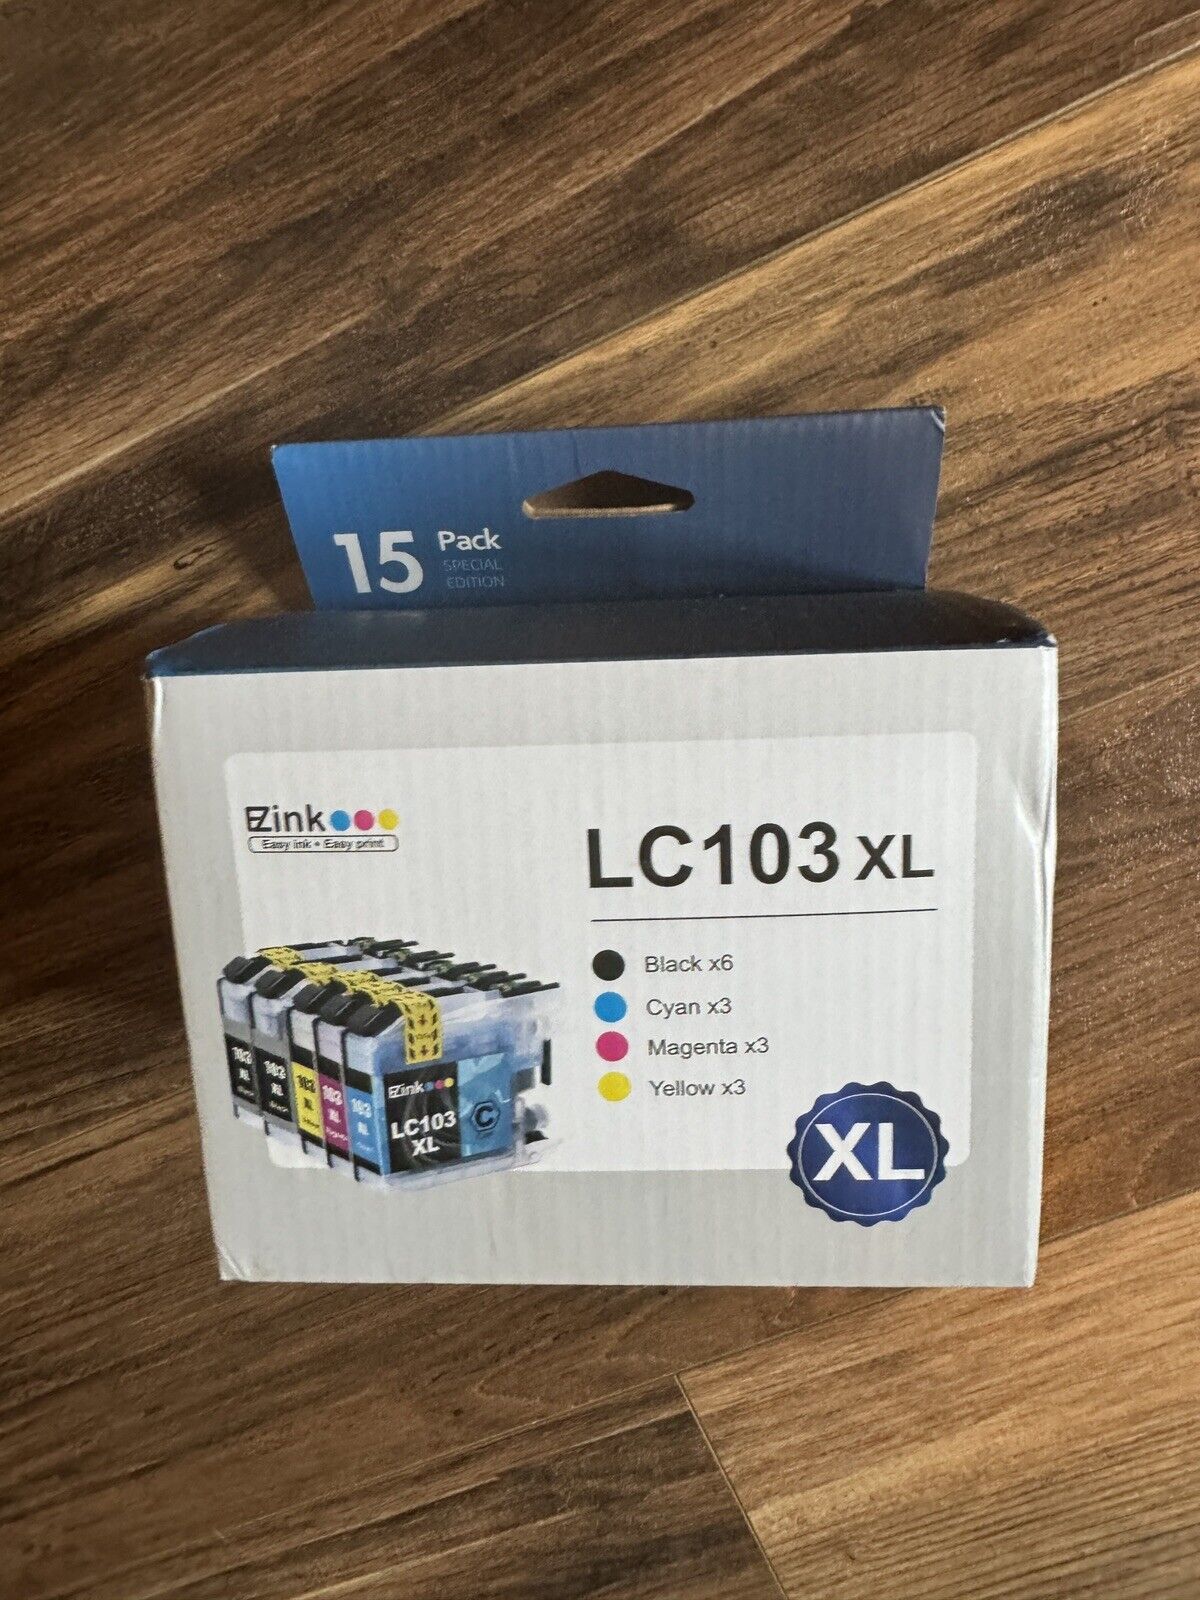 Ezink Ink Cartridges LC103 XL 15 Pack Brand New In Box